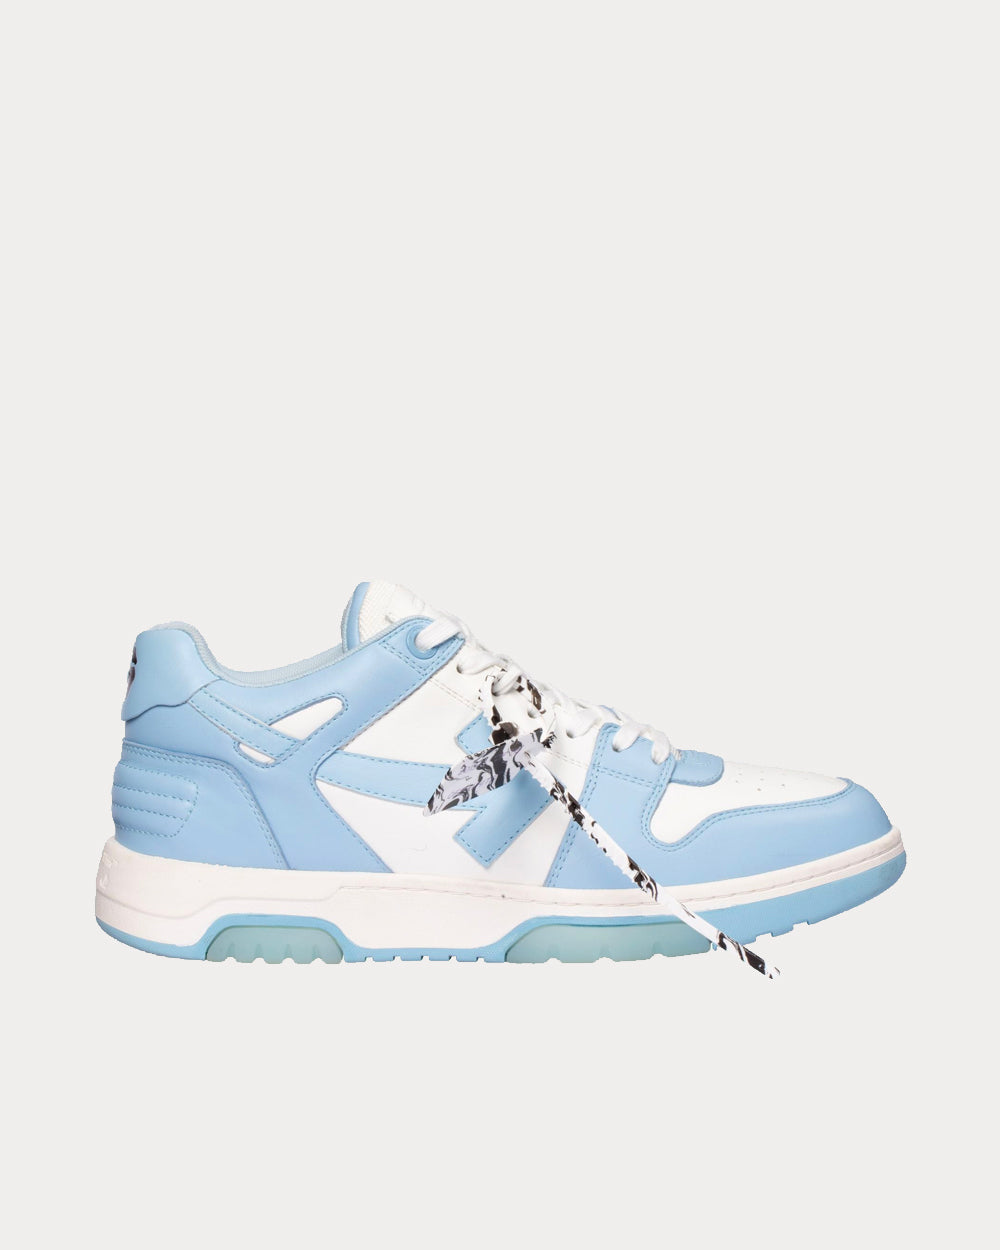 Off-White Out Of Office 'OOO' White Royal Blue - SoleSnk